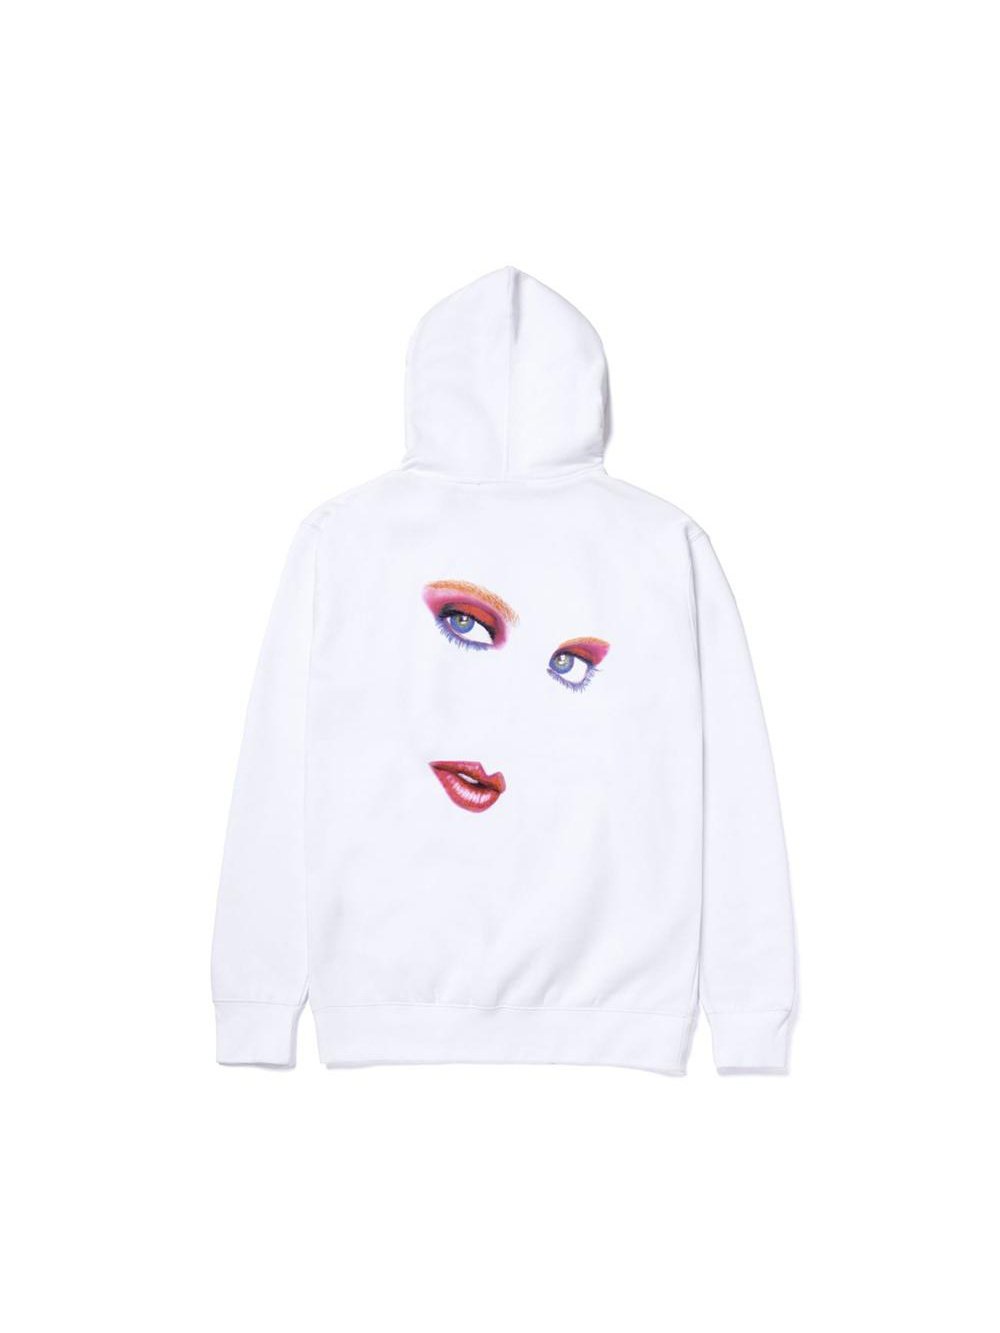 APLAZE | Huf X Playboy May88 Cover Pullover Hoodie White PF00381